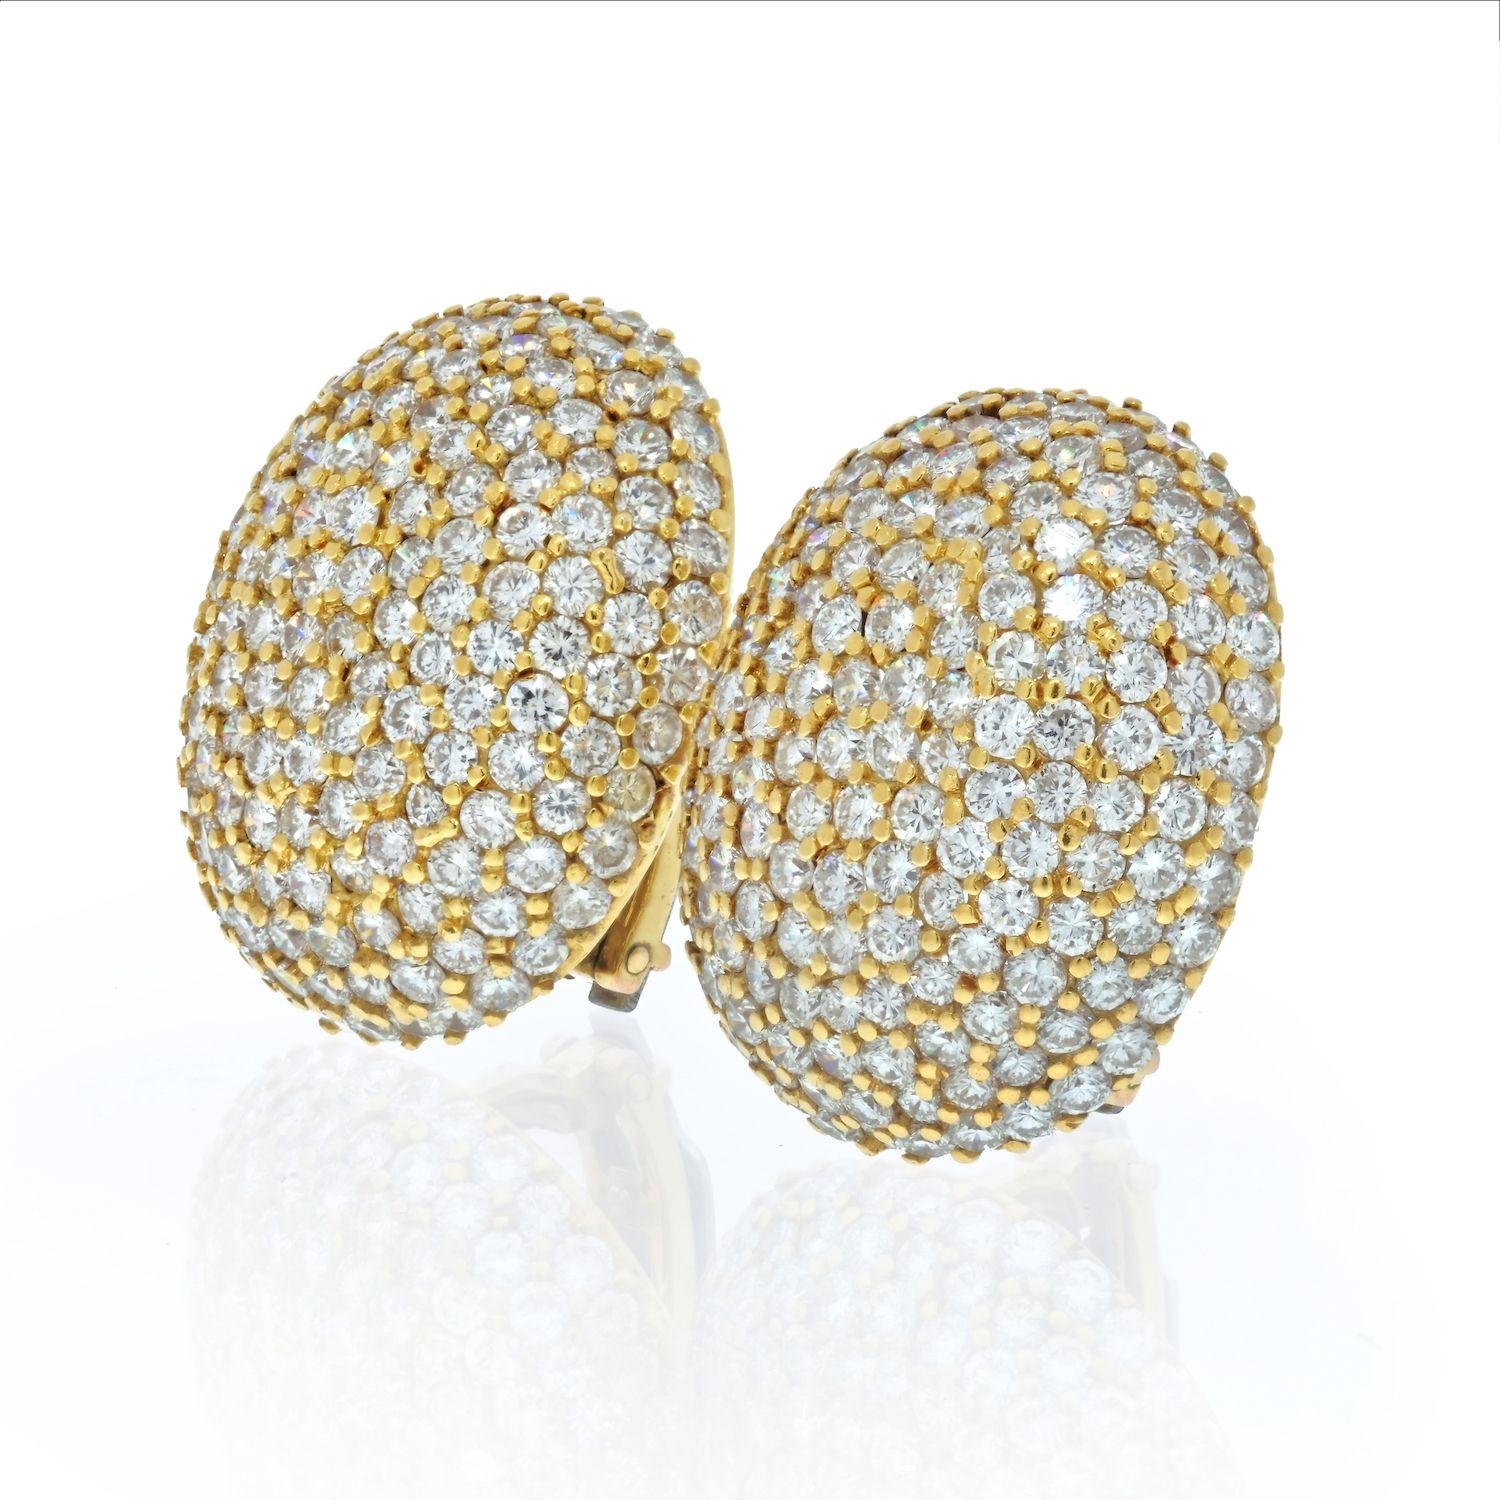 Indulge in the resplendent glamour of these 17 Carats Large Bombe Diamond Cluster Oval Clip Earrings, meticulously crafted in 18K Yellow Gold. 

These earrings are a jubilant celebration of elegance, making them the perfect accompaniment for special